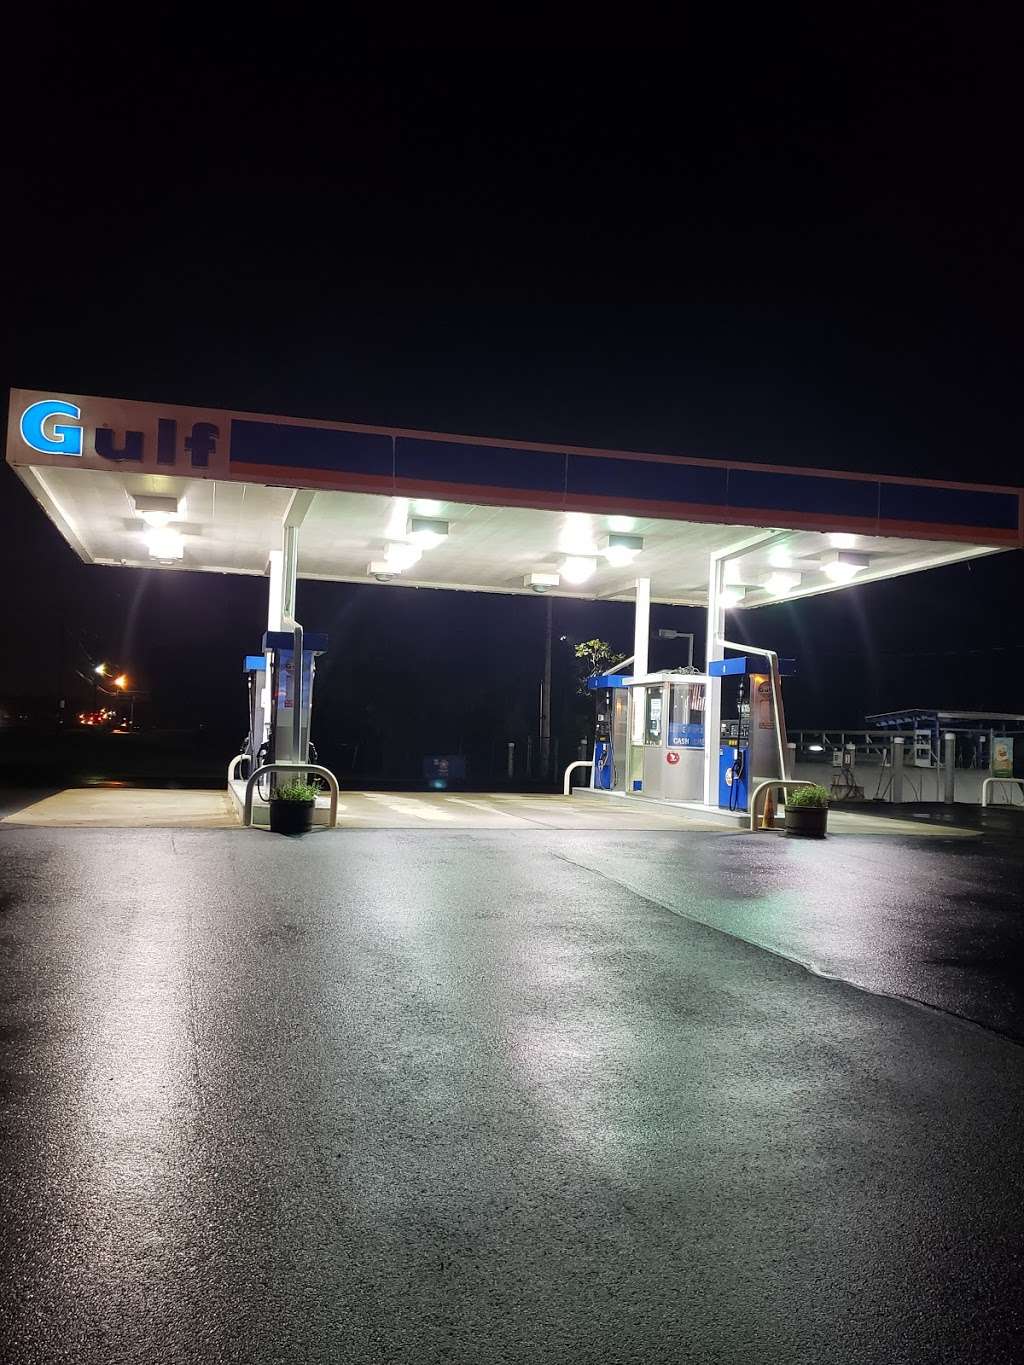 Gulf gas station | 413 route 22 east, Whitehouse Station, NJ 08889, USA | Phone: (908) 923-4288